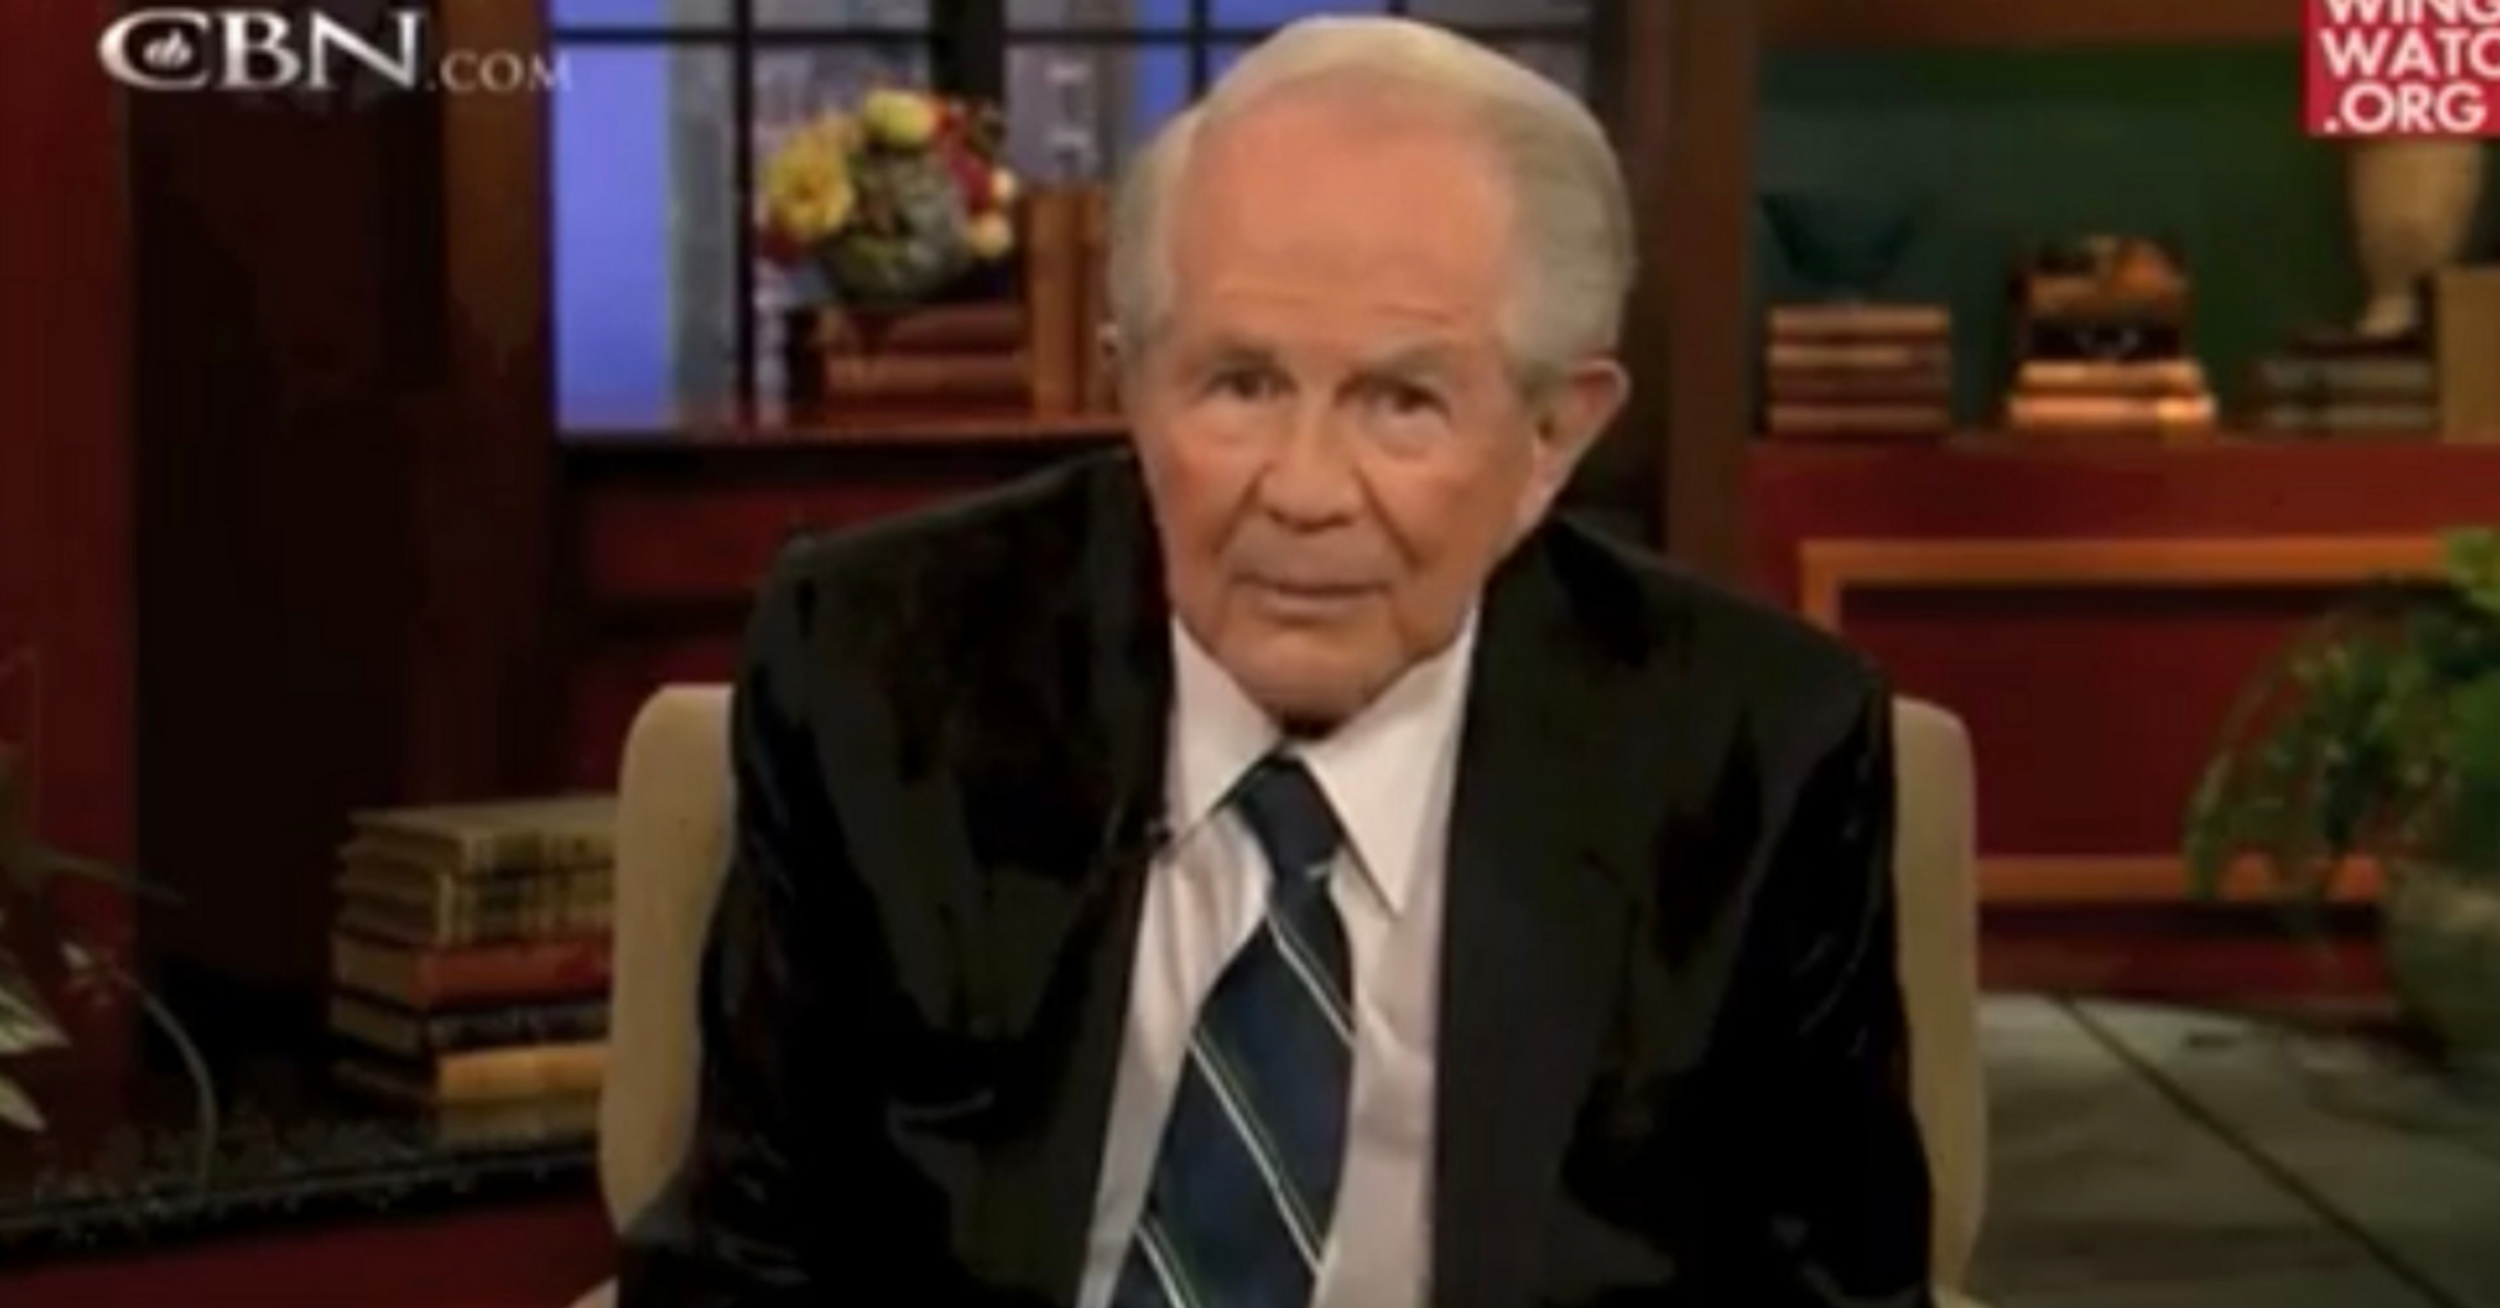 Pat Robertson Claims Gay Men Have Secret Rings They Use To Give People HIV In Resurfaced Video